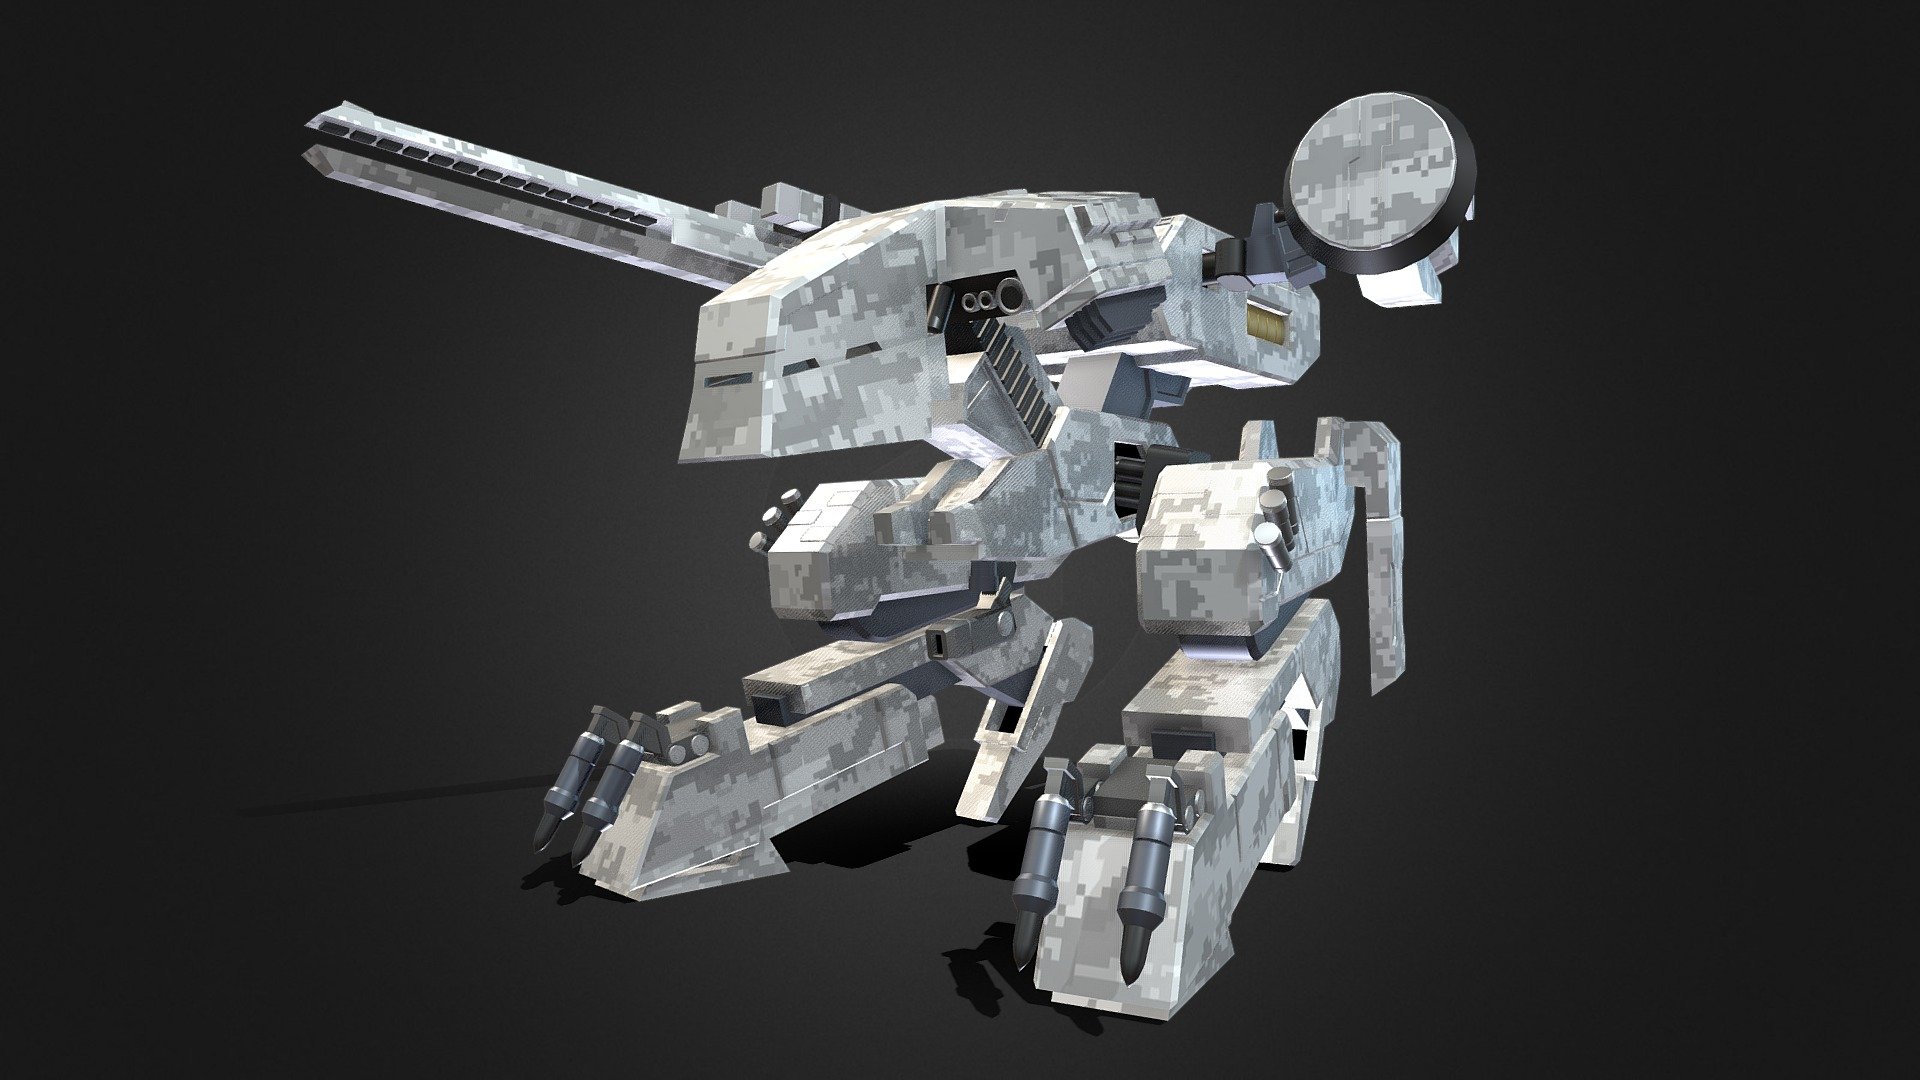 If you’re interested in purchasing any of my models, contact me @ andrewdisaacs@yahoo.com

Metal Gear Rex, as seen in the Metal Gear Solid series.

Made in 3DS Max by myself 3d model